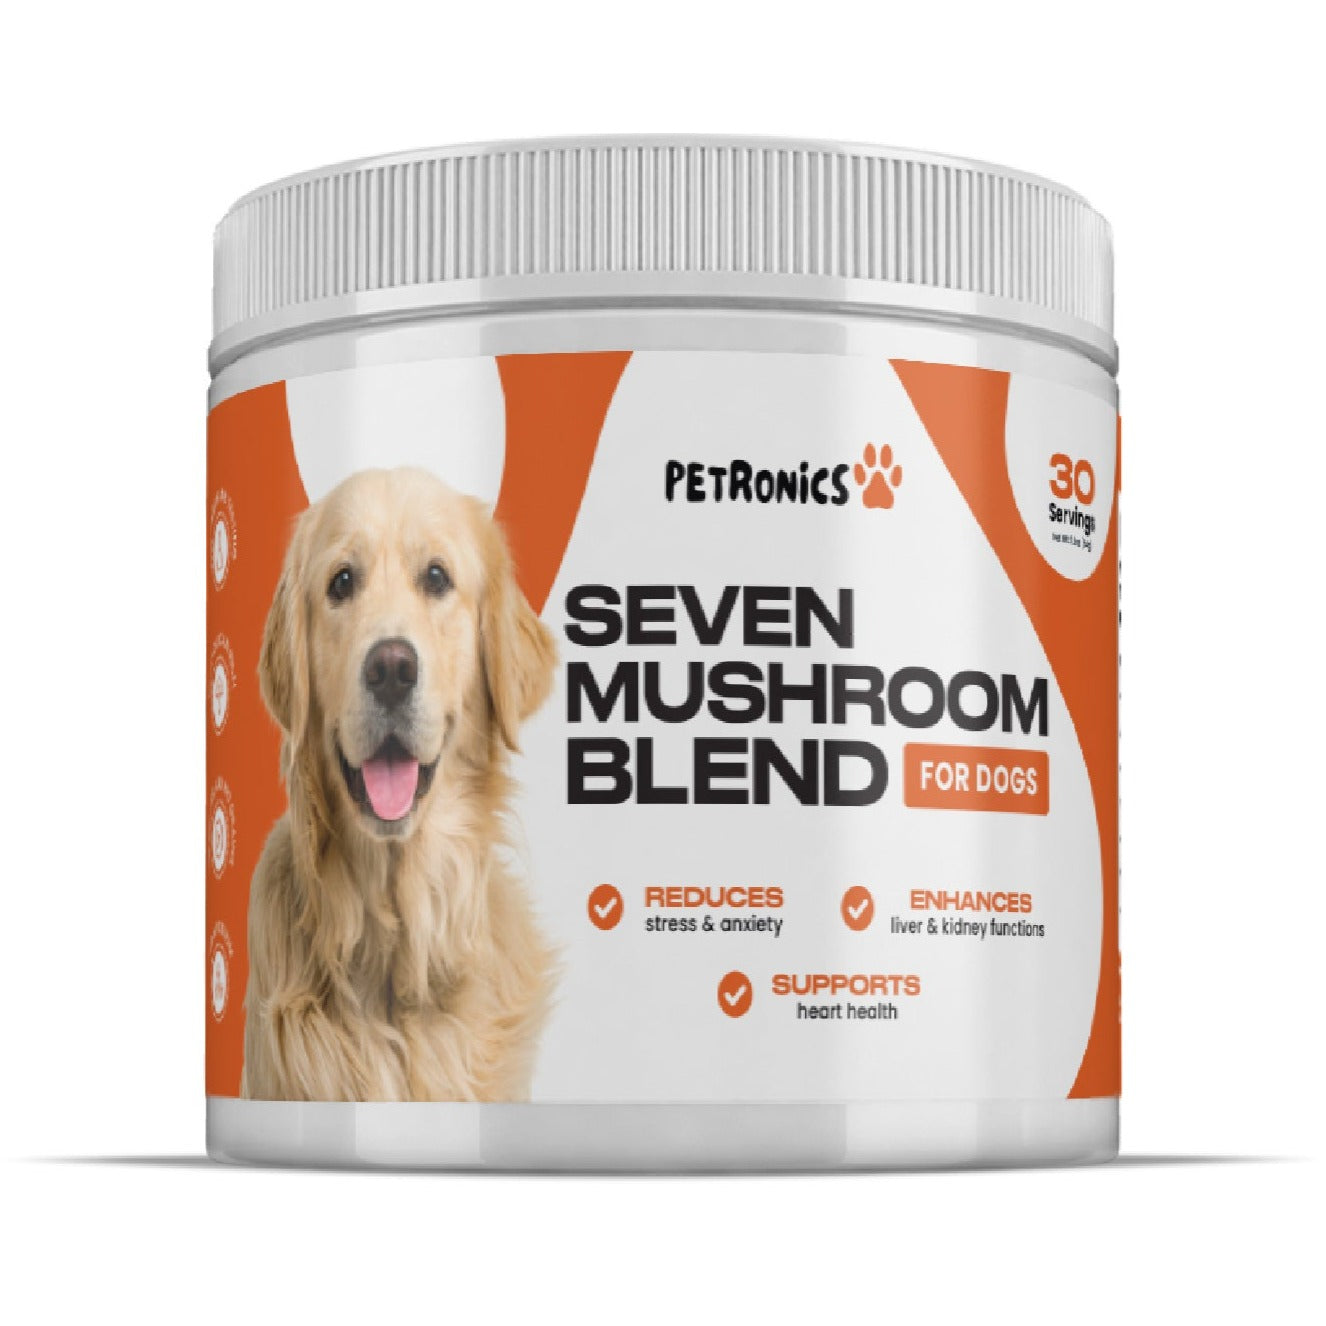 7 Mushroom Blend Anxiety Relief for All Dogs